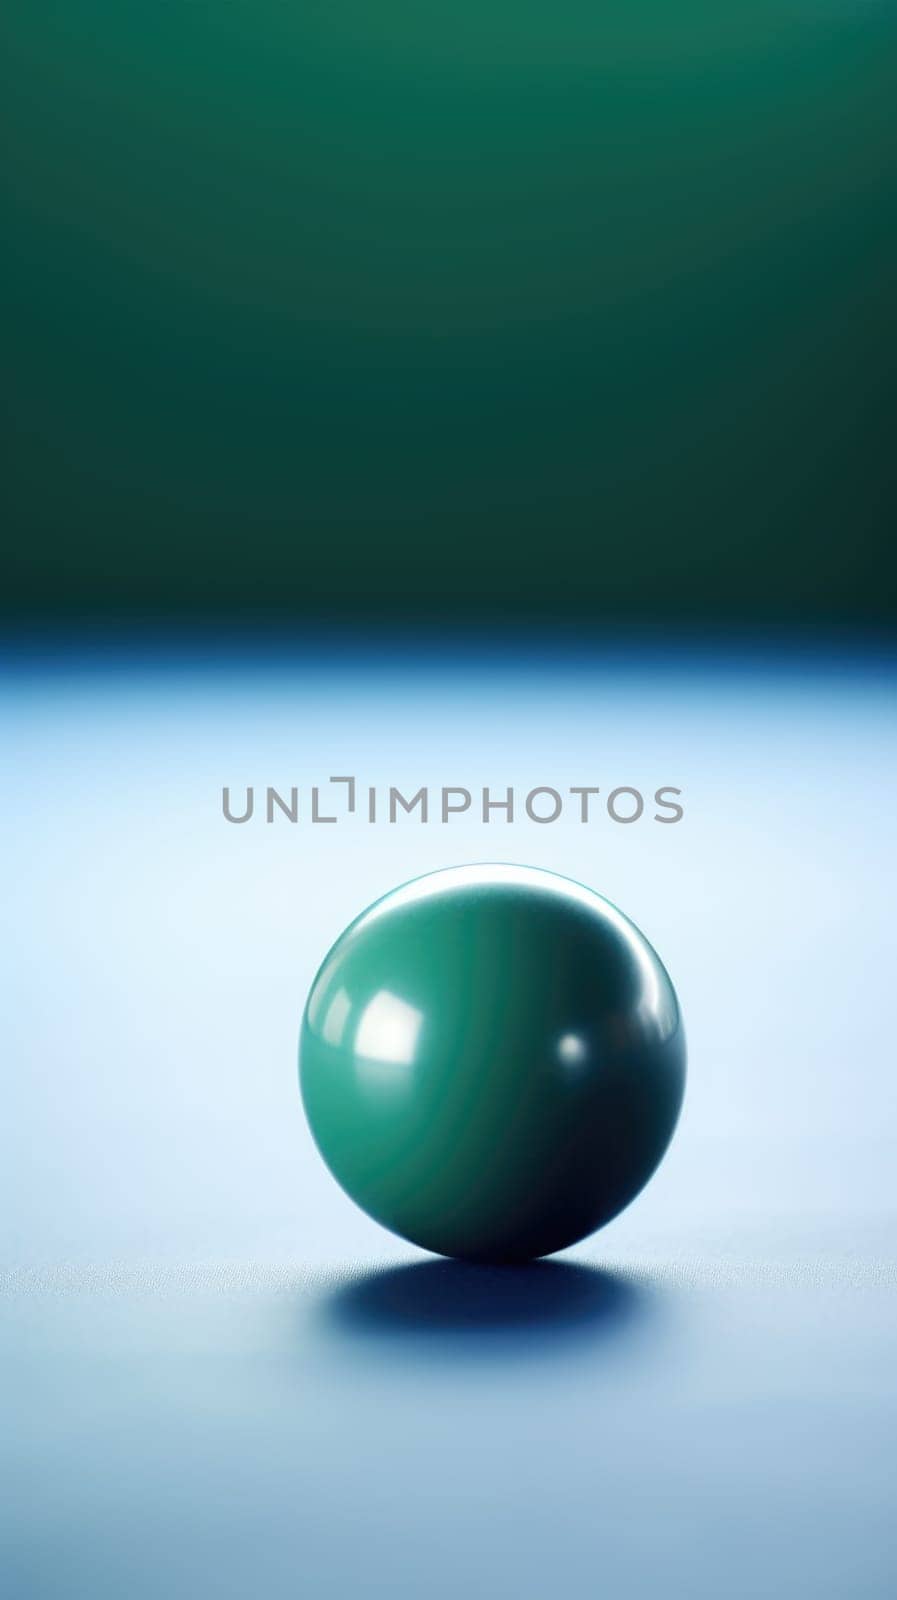 A green ball sitting on top of a blue surface